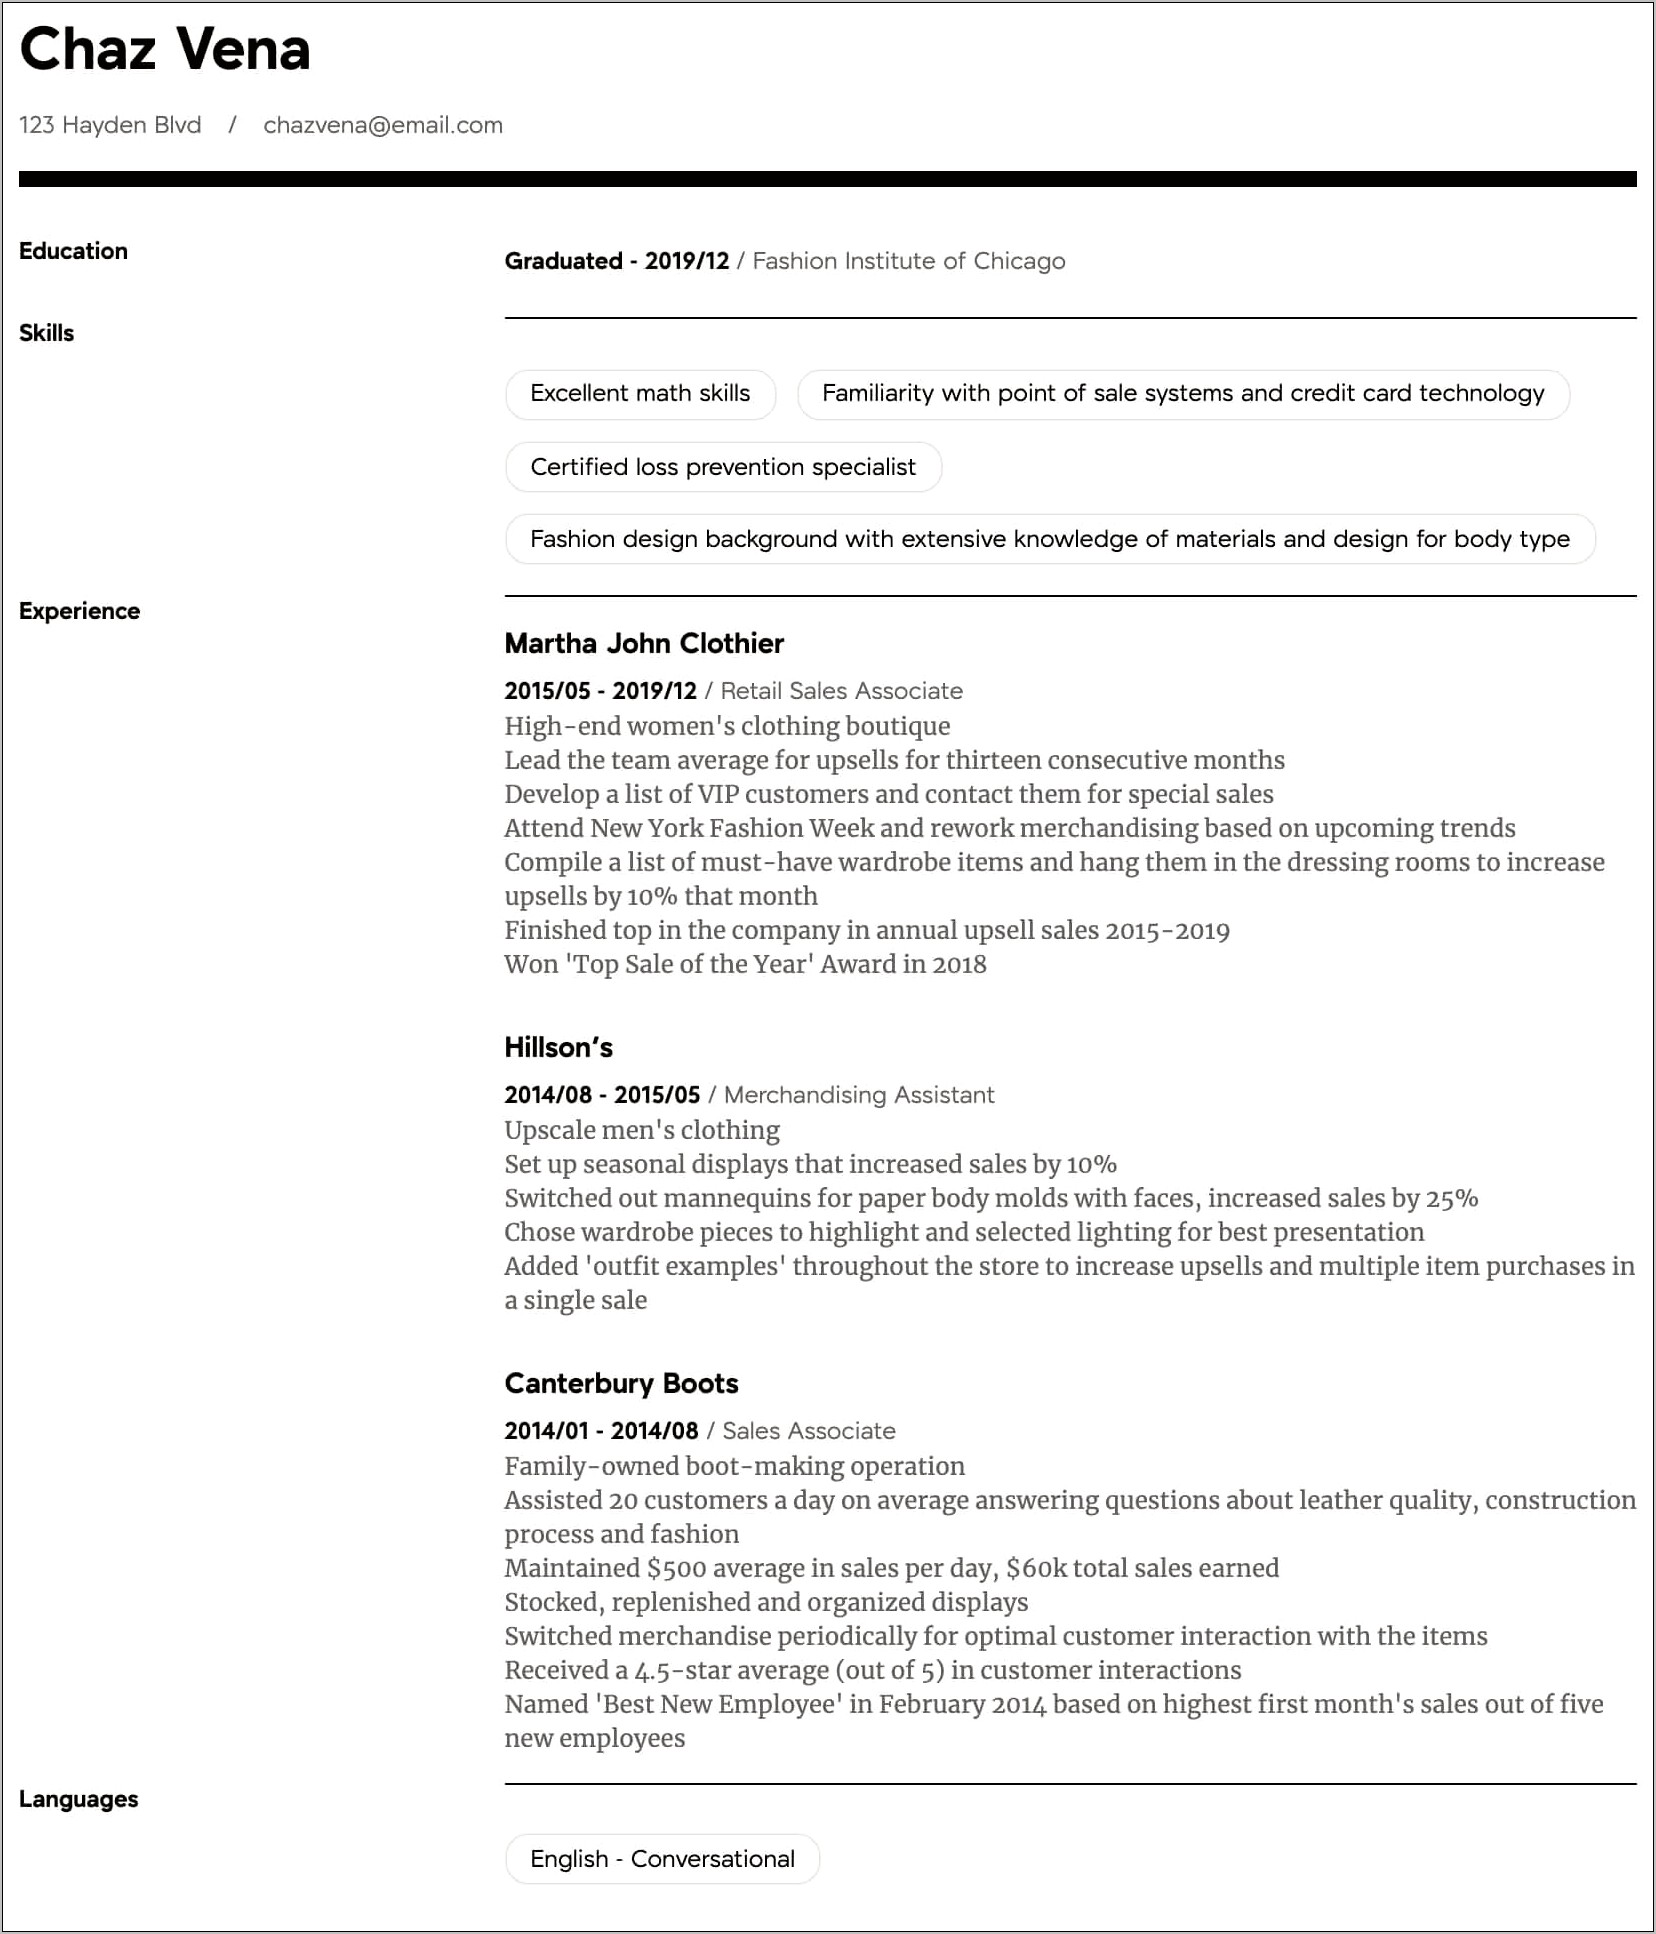 Example Of A Resume For Retail